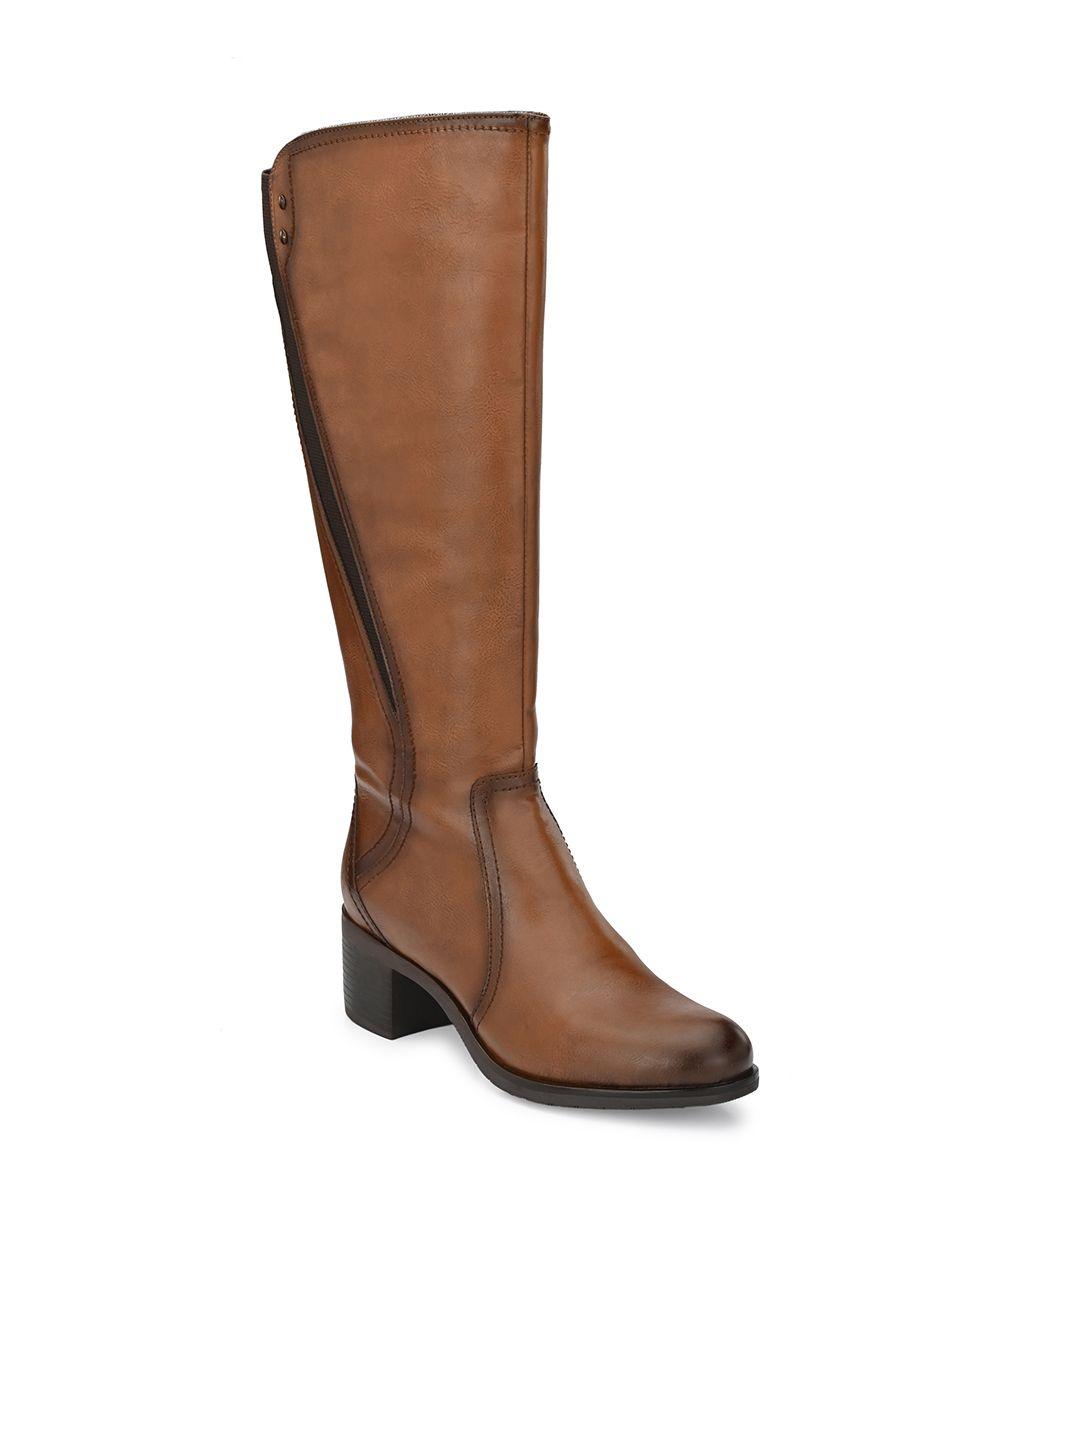 delize-women-tan-brown-solid-heeled-boots